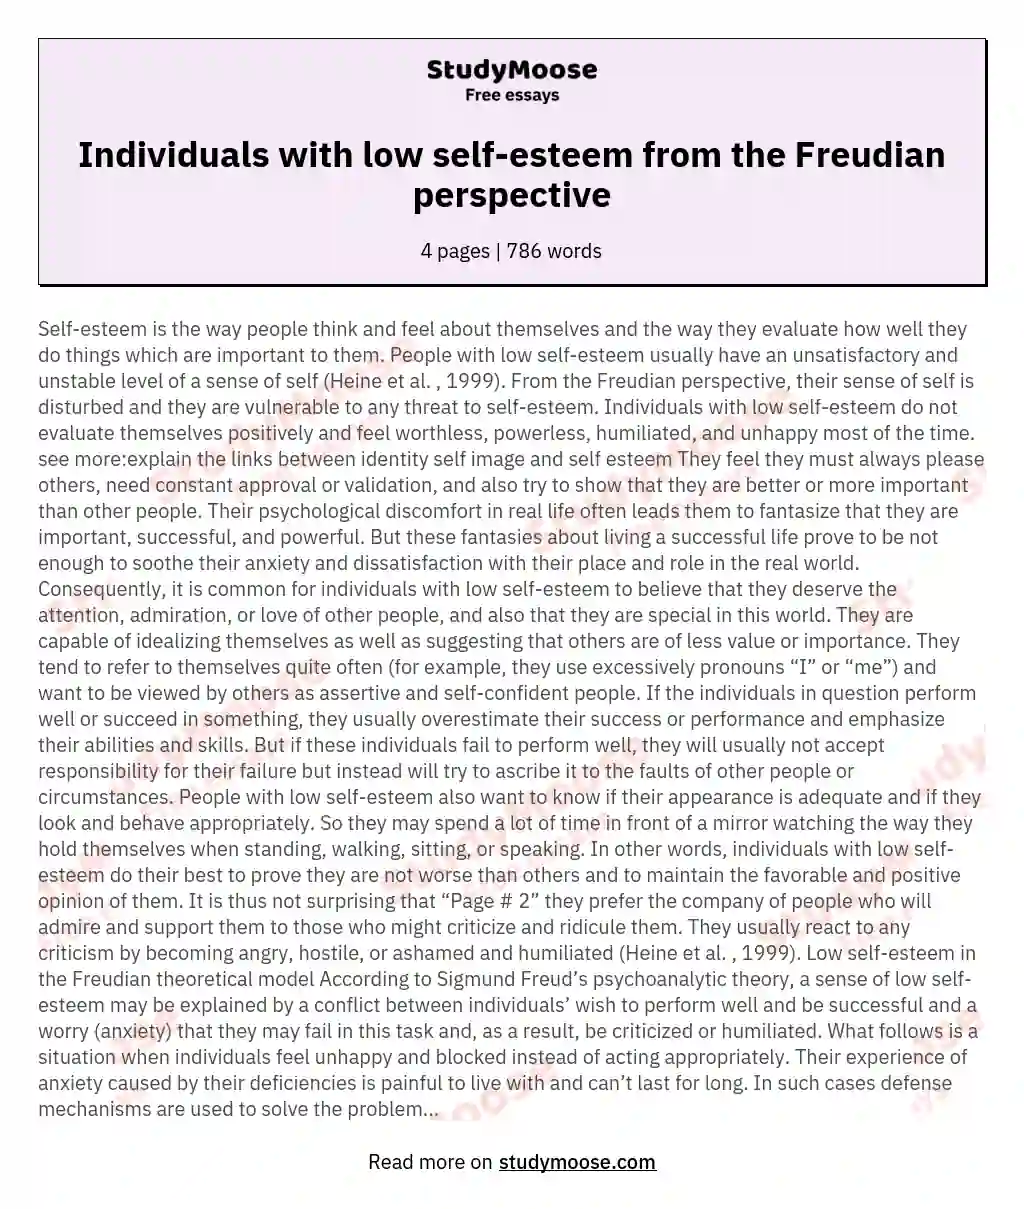 Individuals with low self-esteem from the Freudian perspective essay